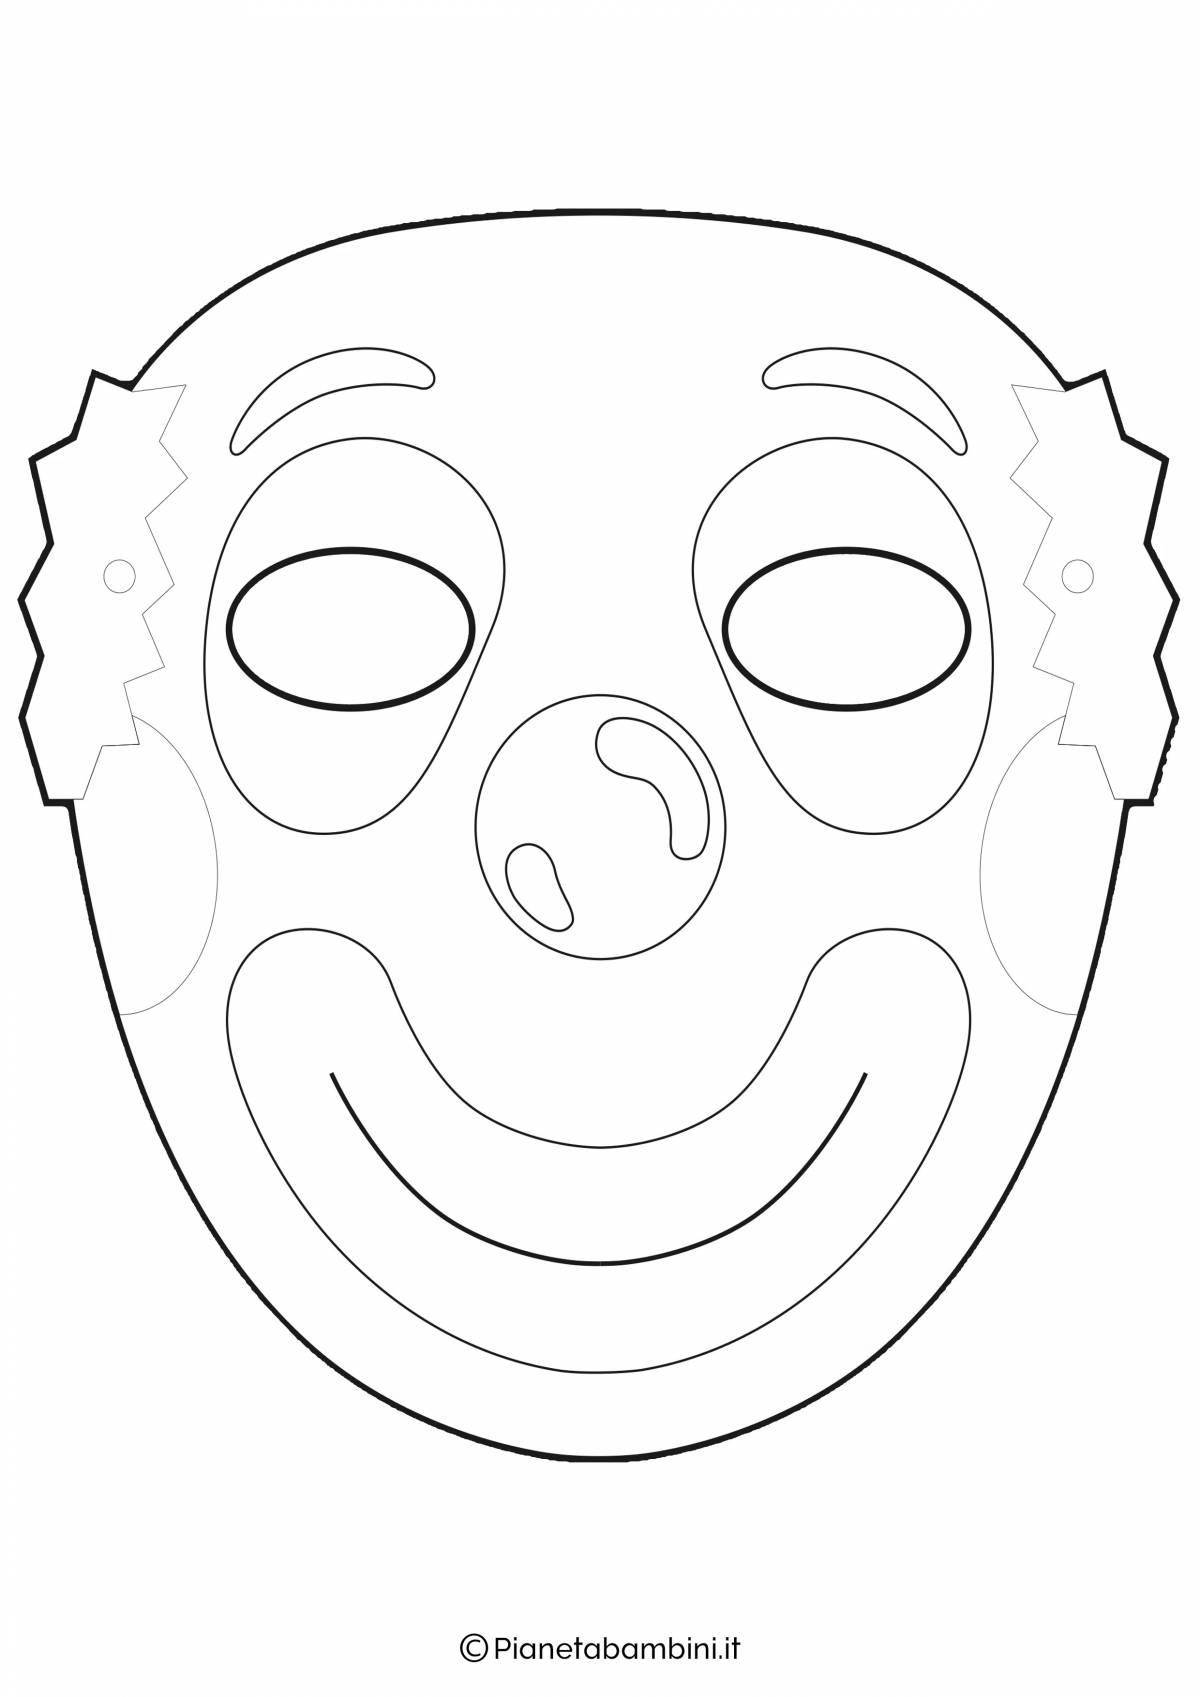 Coloring sheet for a cloth face mask